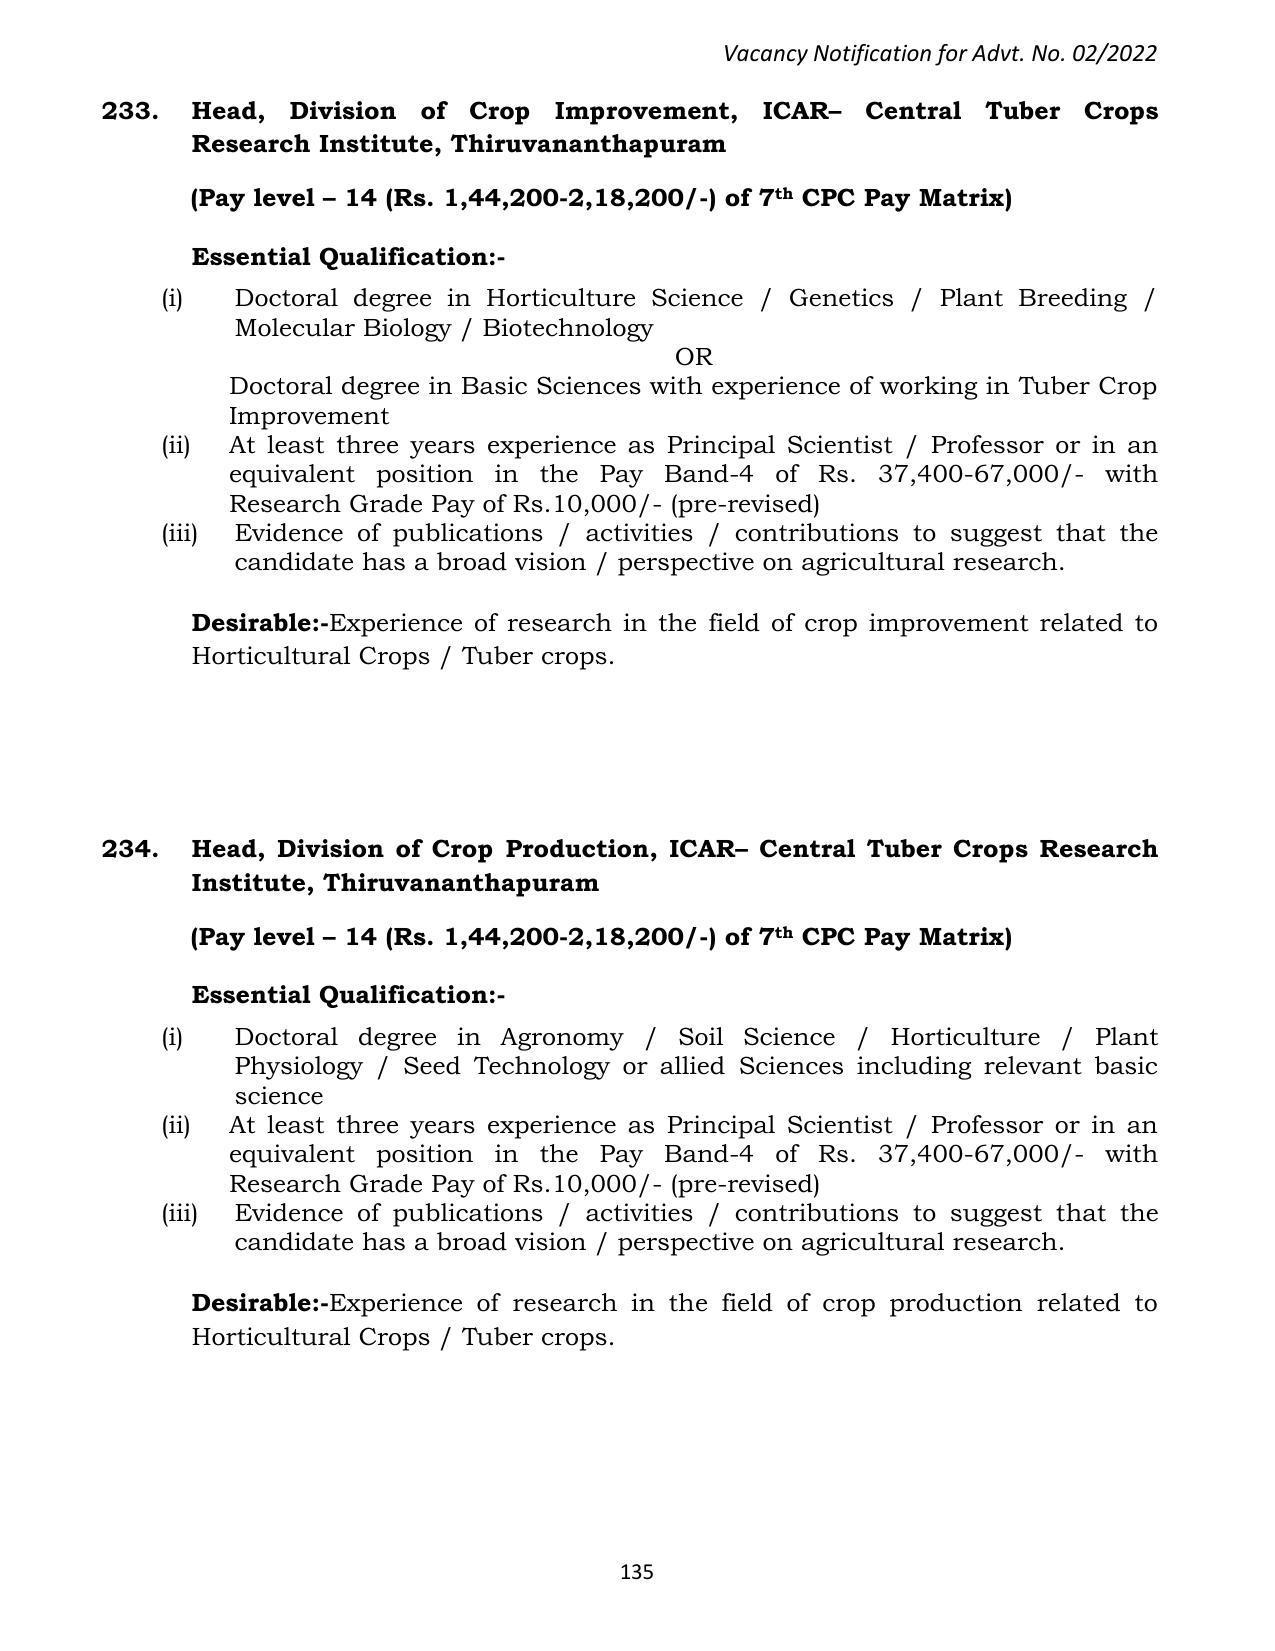 ASRB Non-Research Management Recruitment 2022 - Page 18